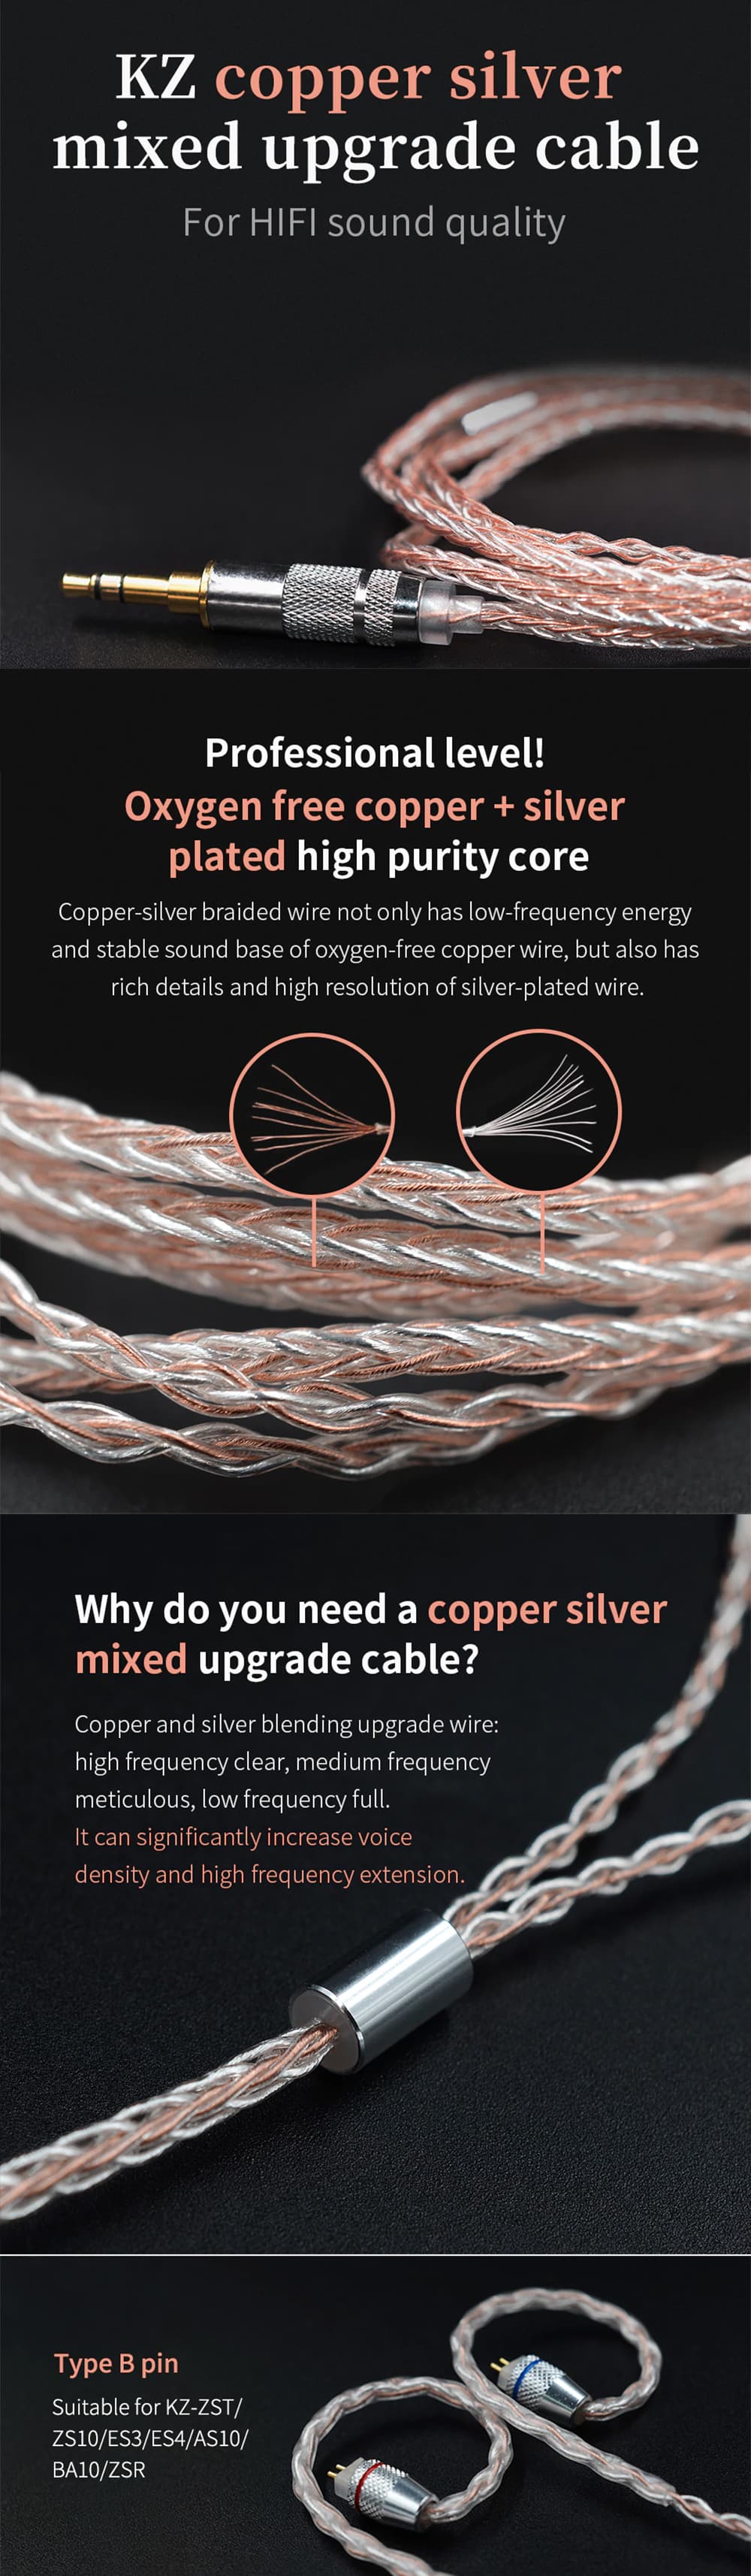 KZ B Pin Copper Silver Mixed Upgrade Cable 2